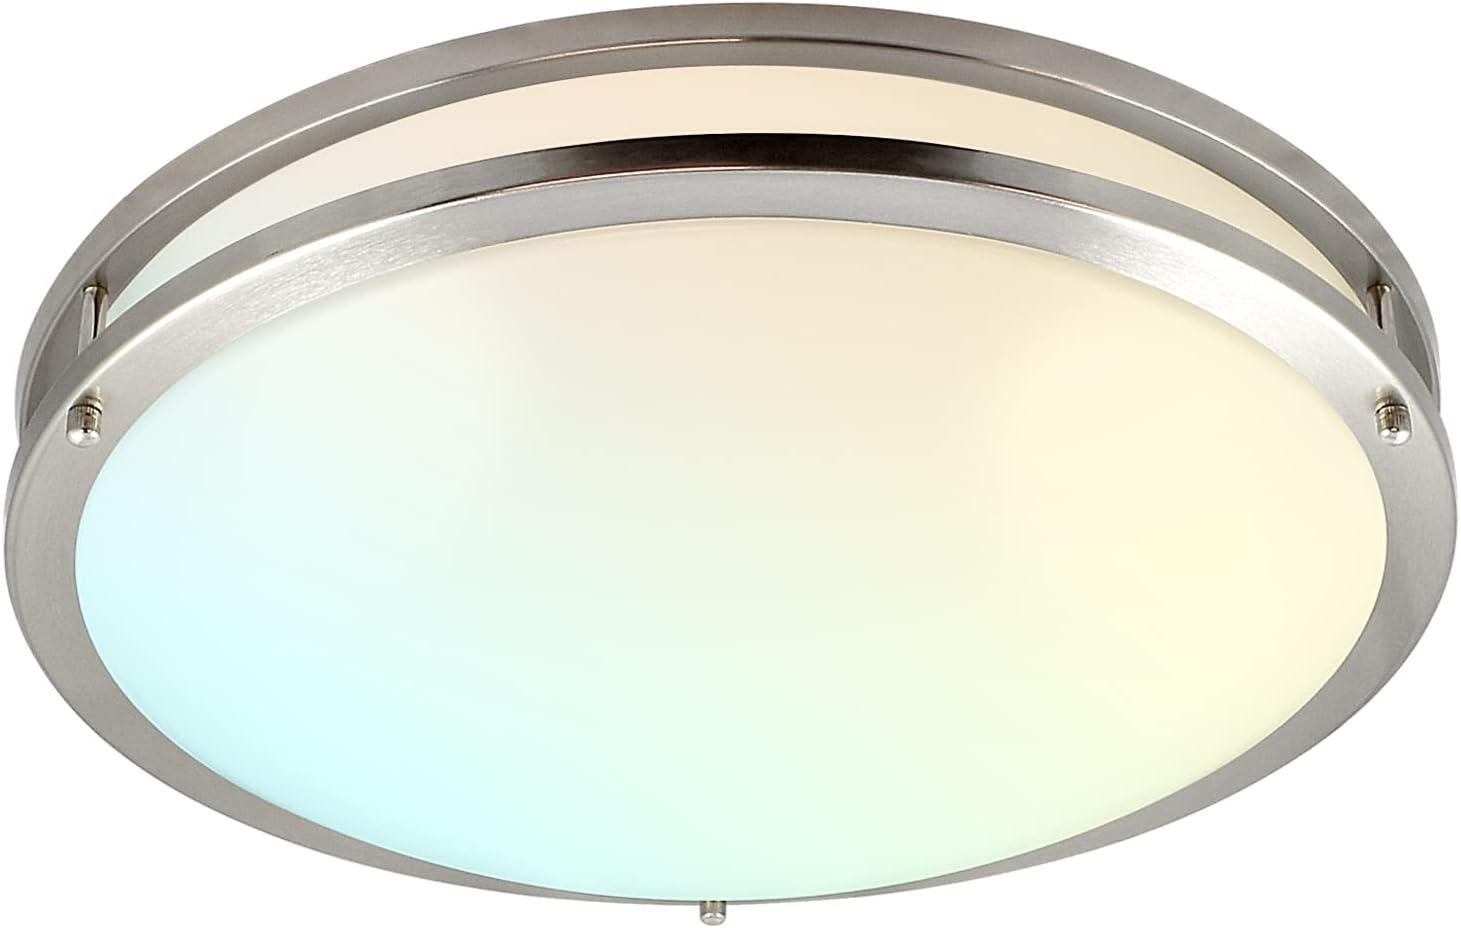 SelectaGlow 18" Chrome LED Flush Mount Ceiling Light with Color Options